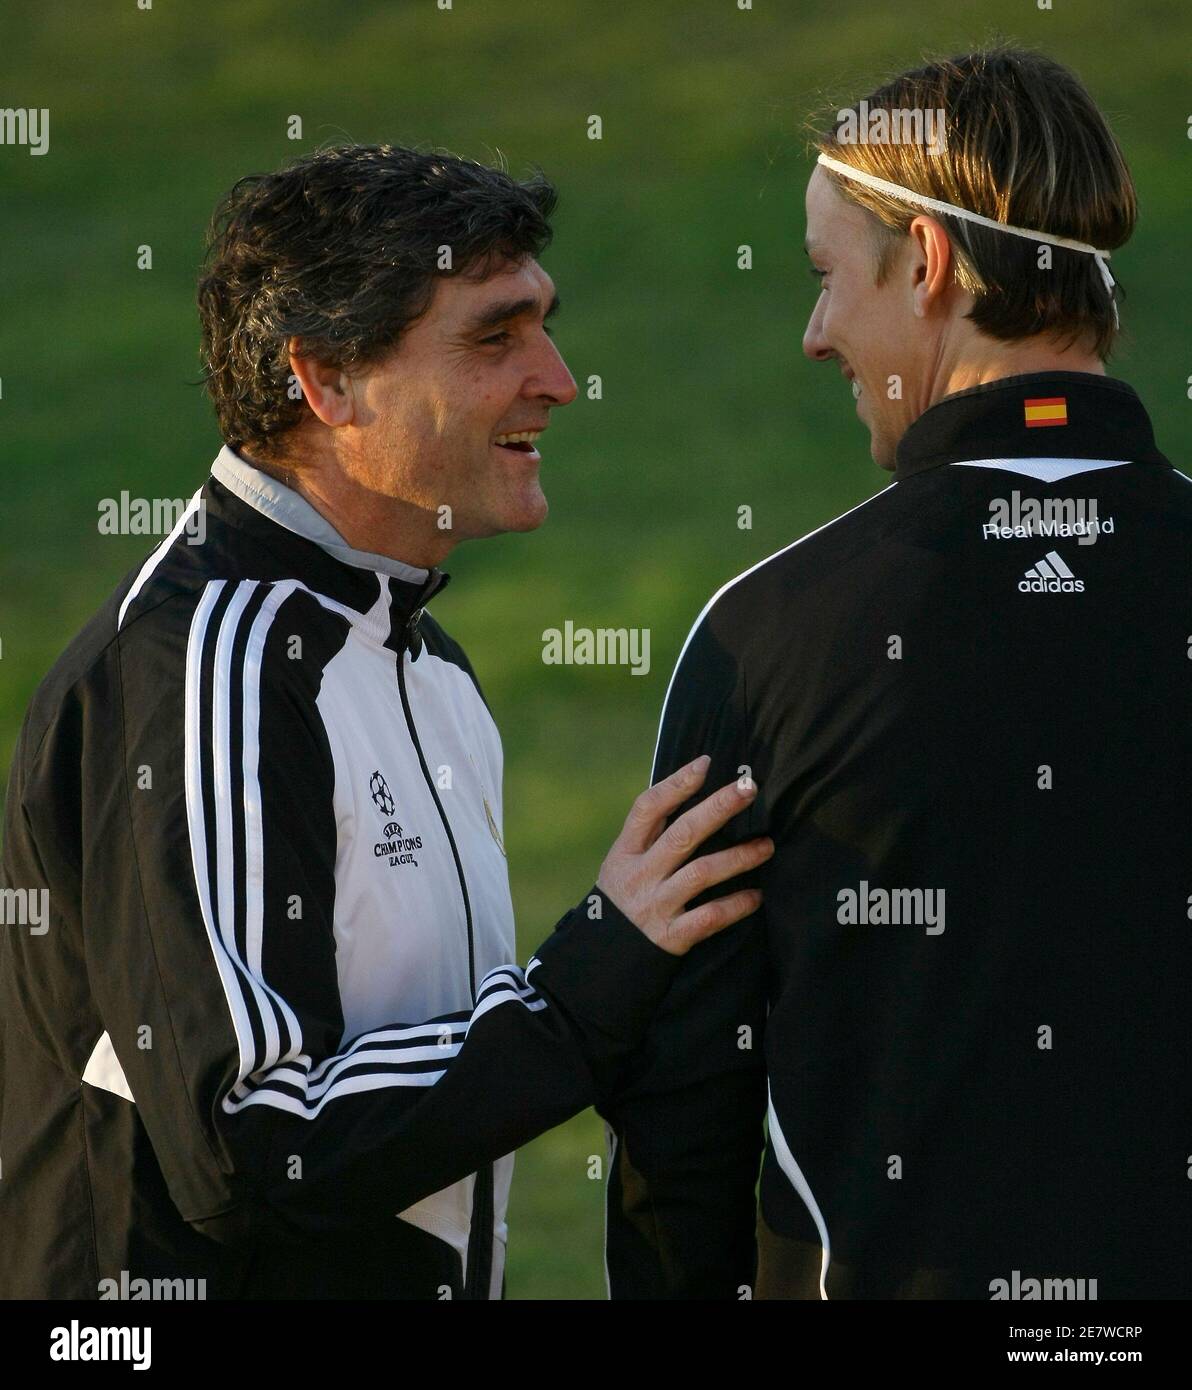 Real Madrid's new coach Juande Ramos (L) talks to Real Madrid player Guti  during a training session ahead of their Champions League match against  Zenit Saint Petersburg in Madrid December 9, 2008.